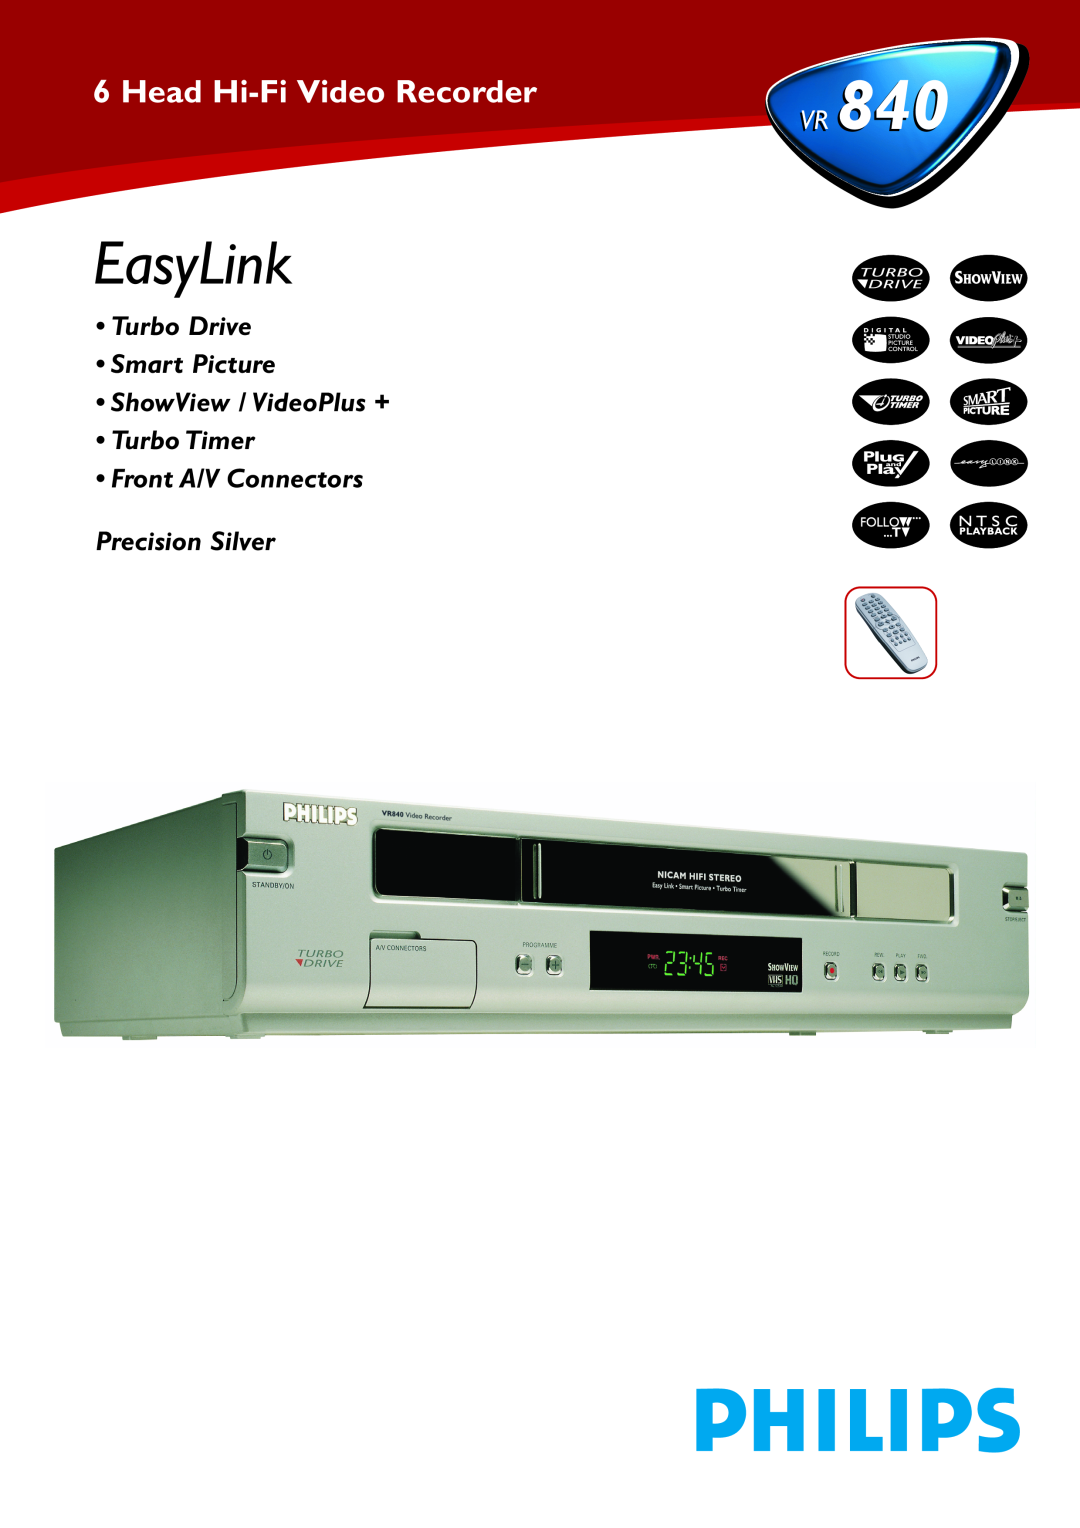 Philips VR840 manual EasyLink, Head Hi-Fi Video Recorder840, Turbo Drive Smart Picture ShowView / VideoPlus + Turbo Timer 